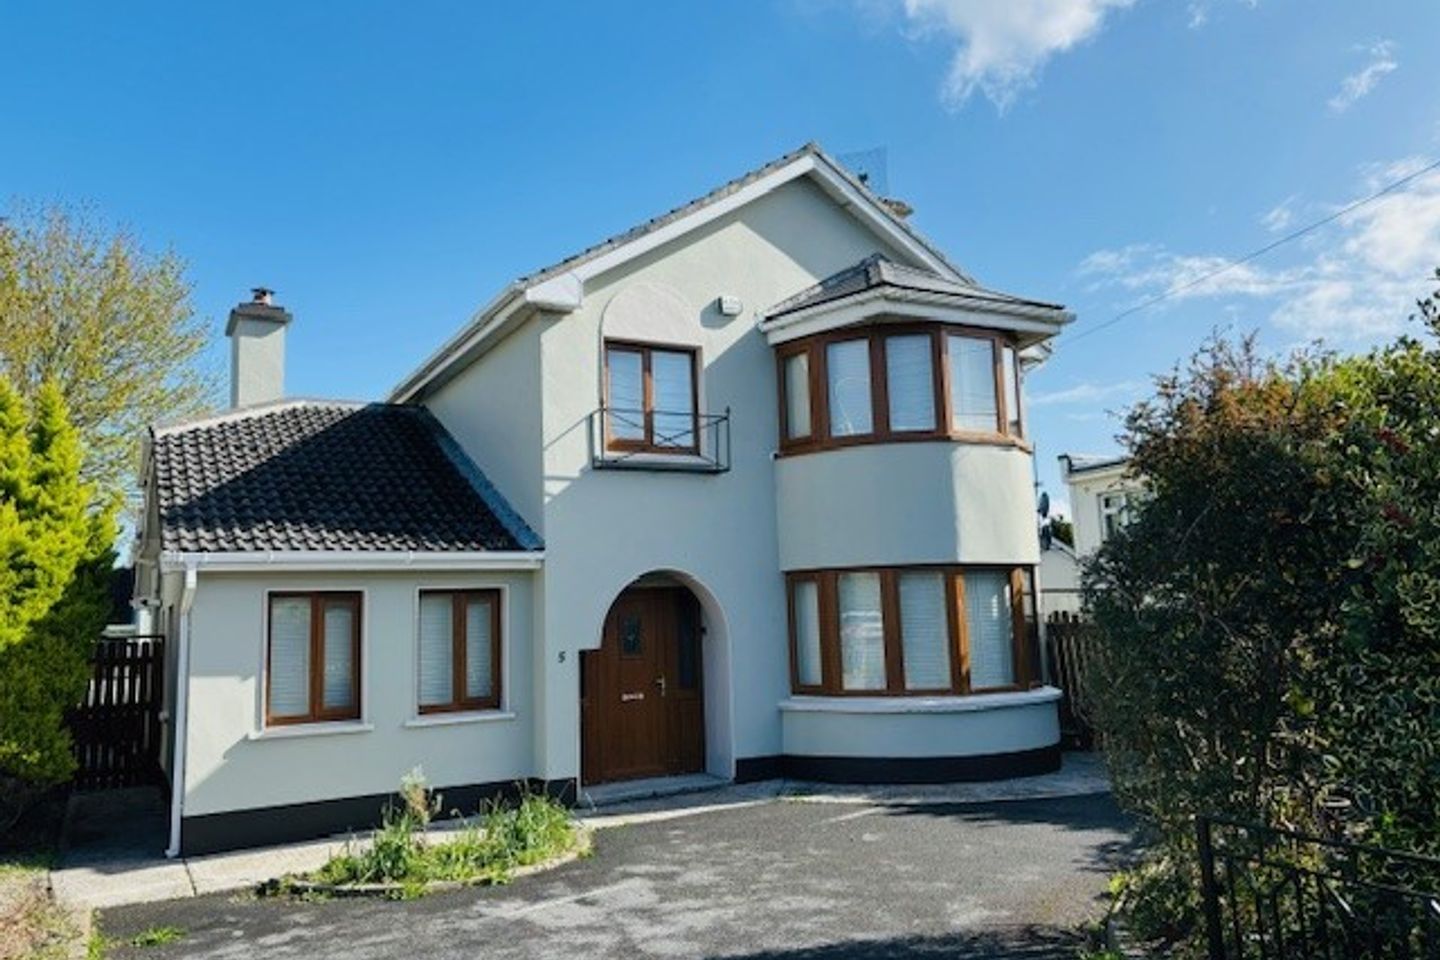 5 Victoria Court, Cusack Road, Ennis, Co. Clare, V95W2T0